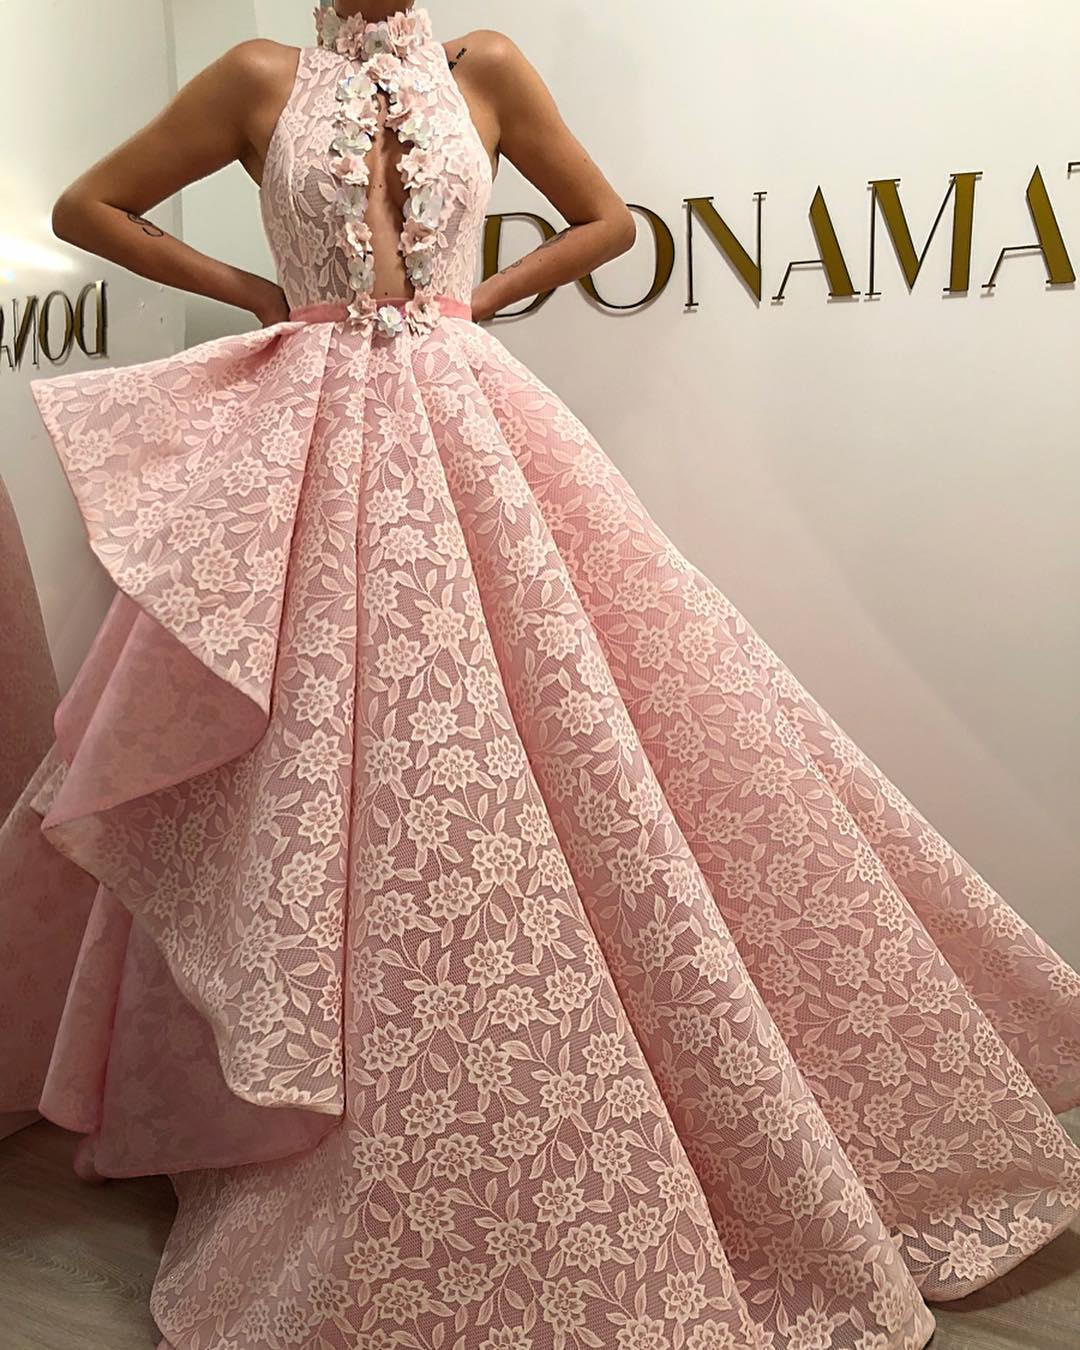 gowns for women | gowns for girls | gowns for sale | gowns for weddings | gowns for prom | gowns dresses | gowns beautiful gowns | gowns images | gowns design | gowns fashion show | gowns pink floral 